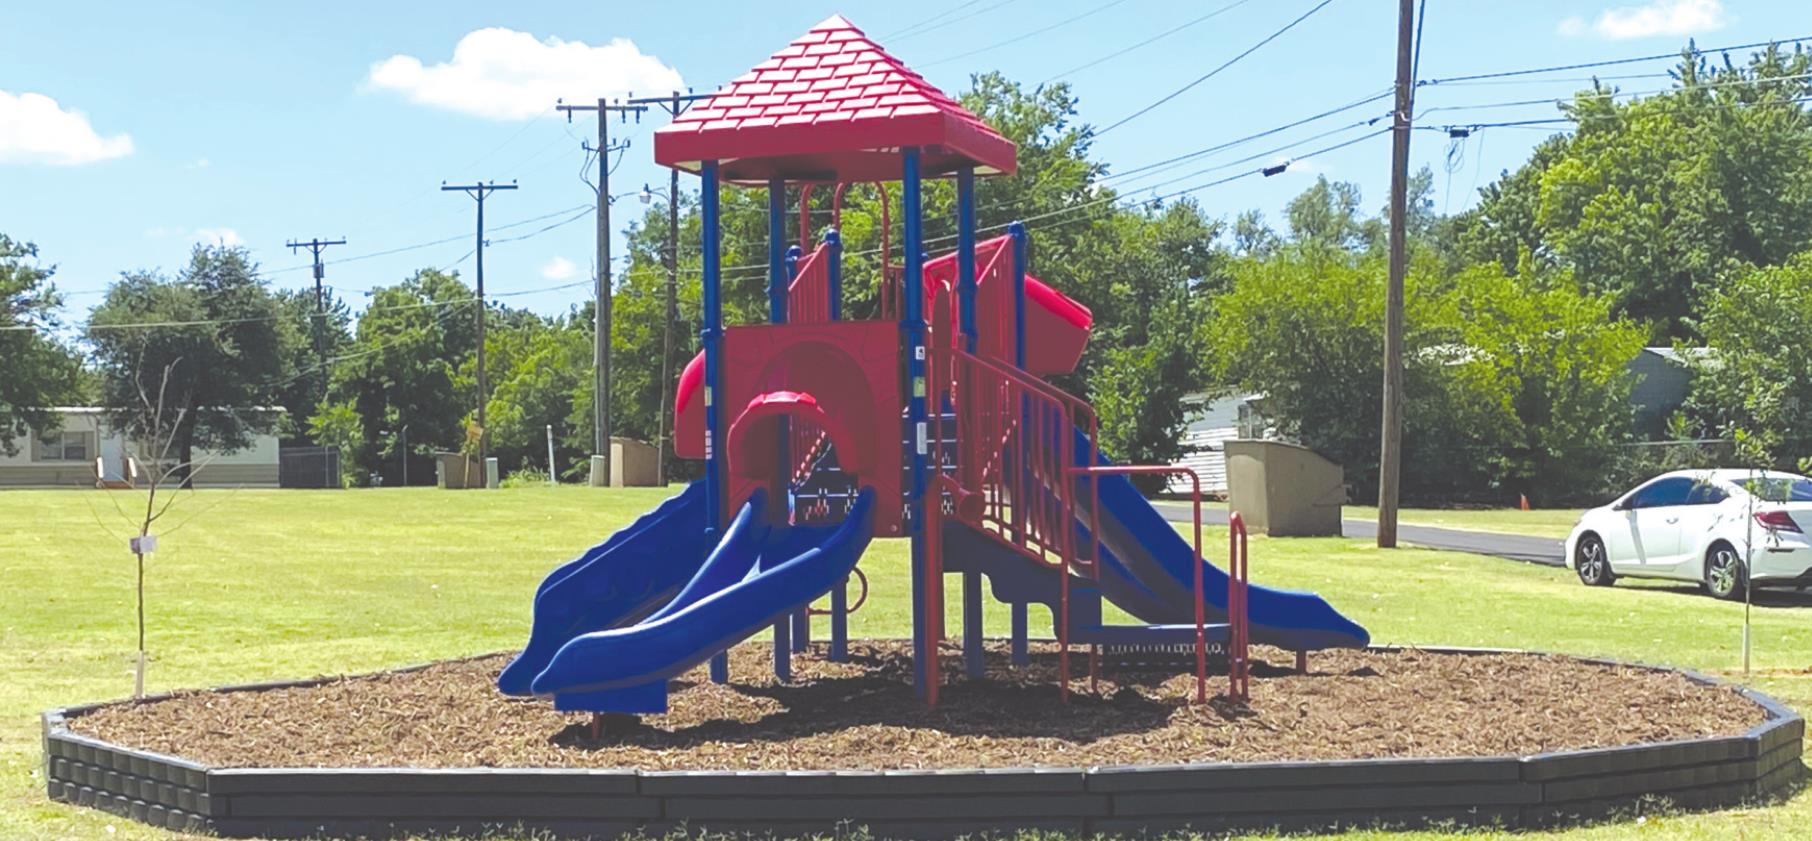 A new playground which was completed Tuesday in Heritage Park. The new playground is open and ready for kids to come and play. Josh Jennings/WDN